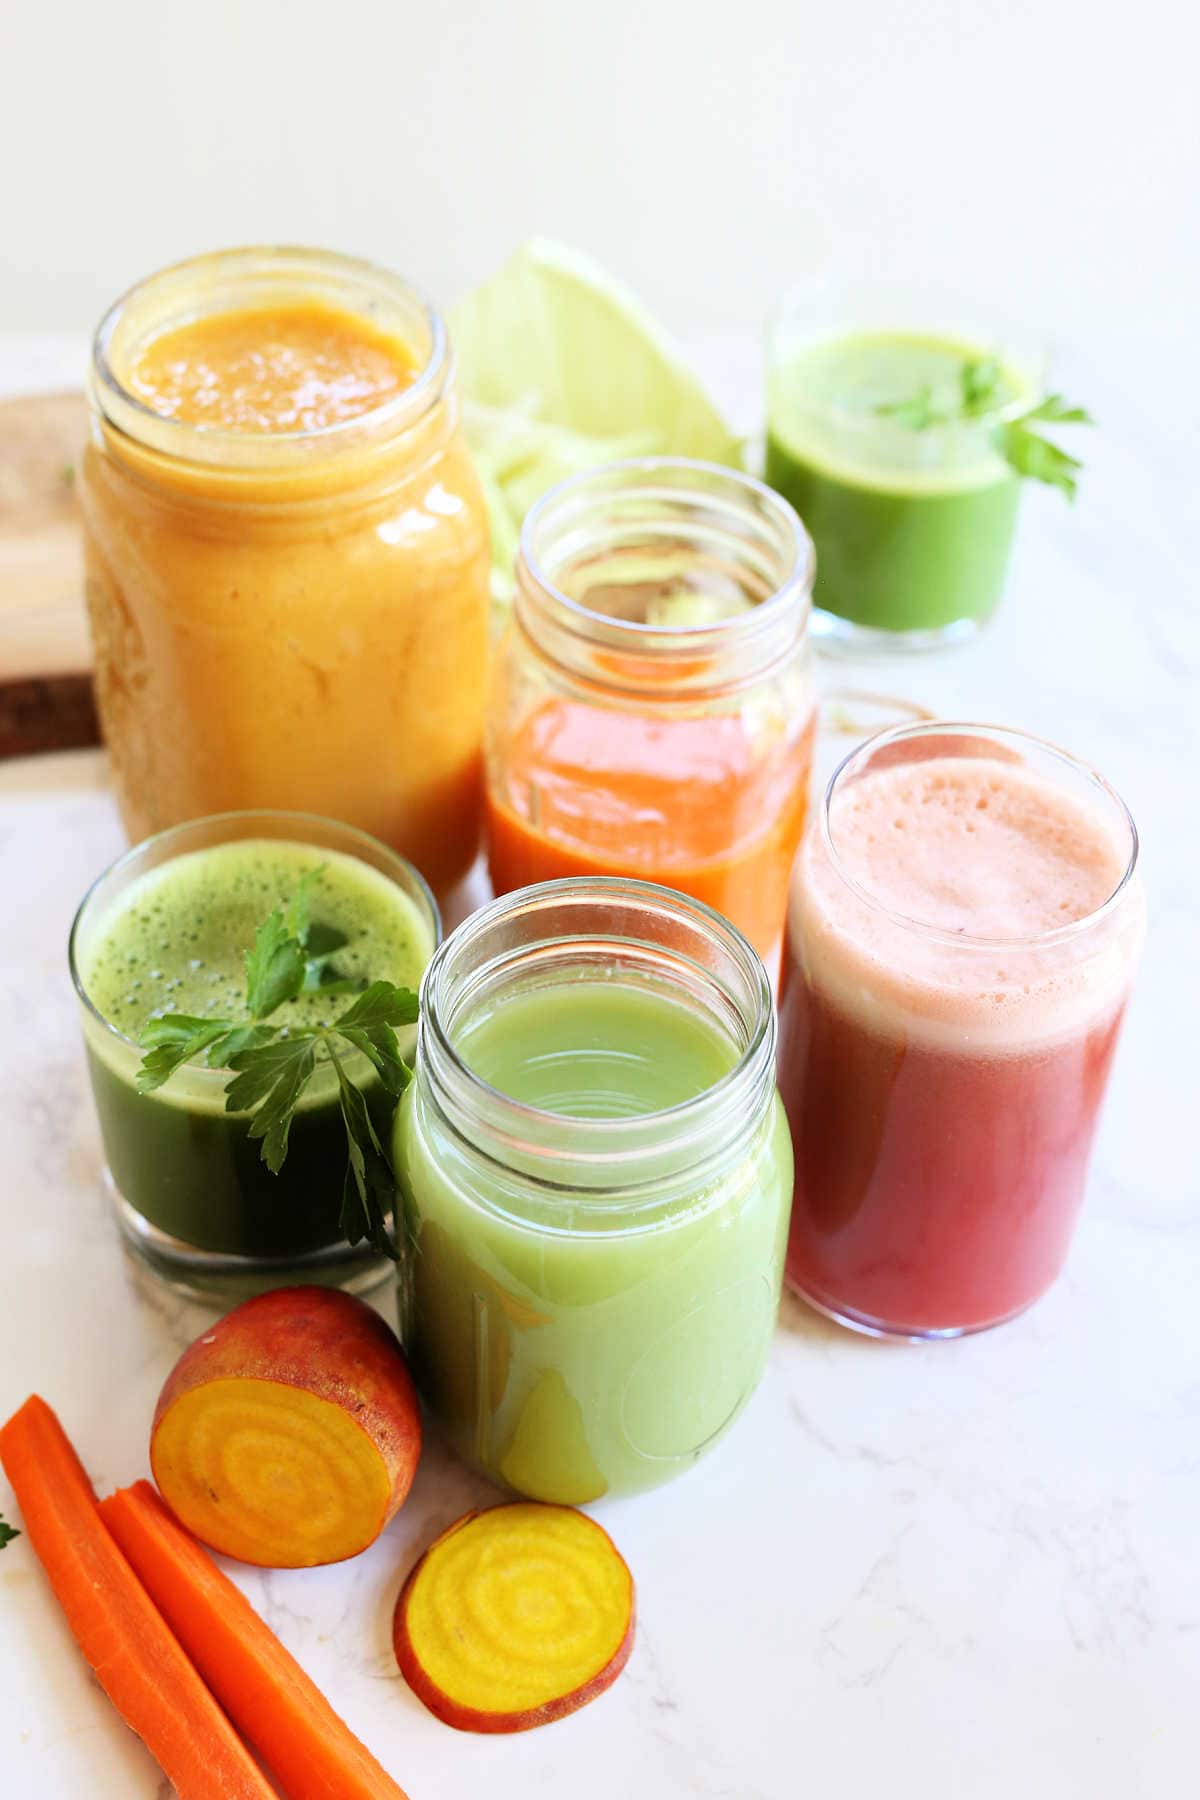 Juice recipes for weight loss in jars and cups.